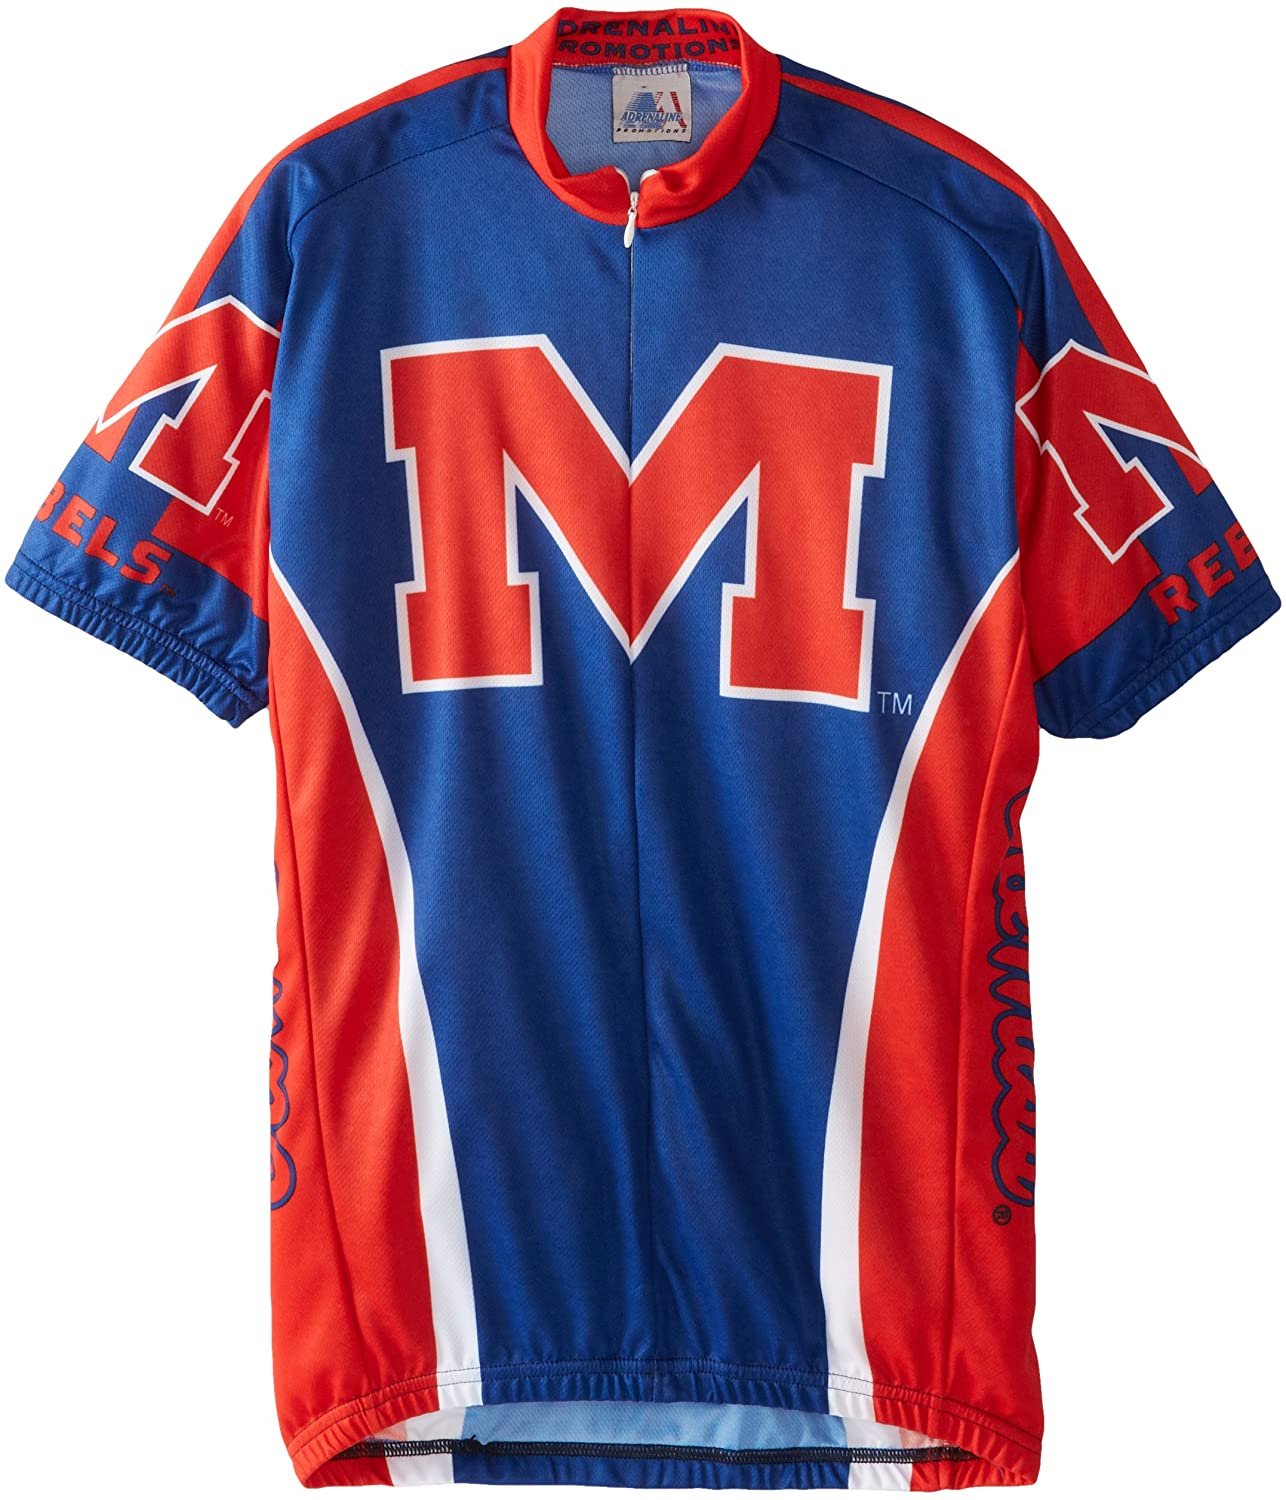 NCAA Mississippi Ole Miss Rebels Cycling Jersey